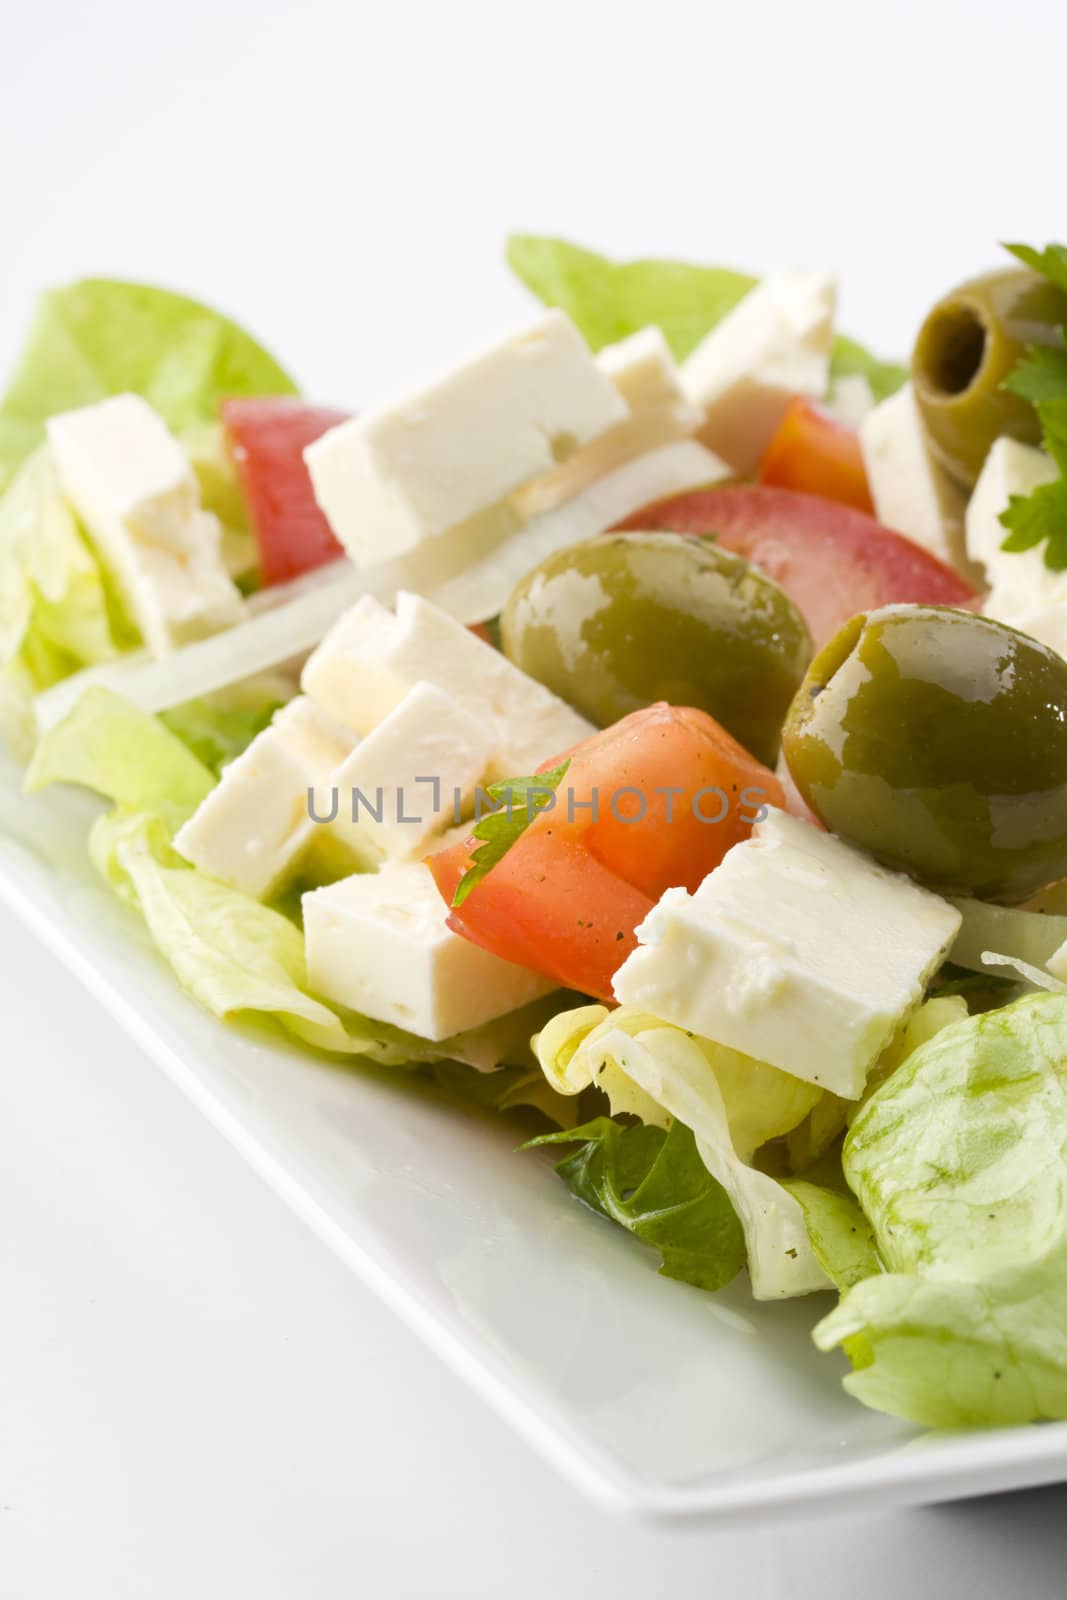 detail of a greek salad on a plate by bernjuer